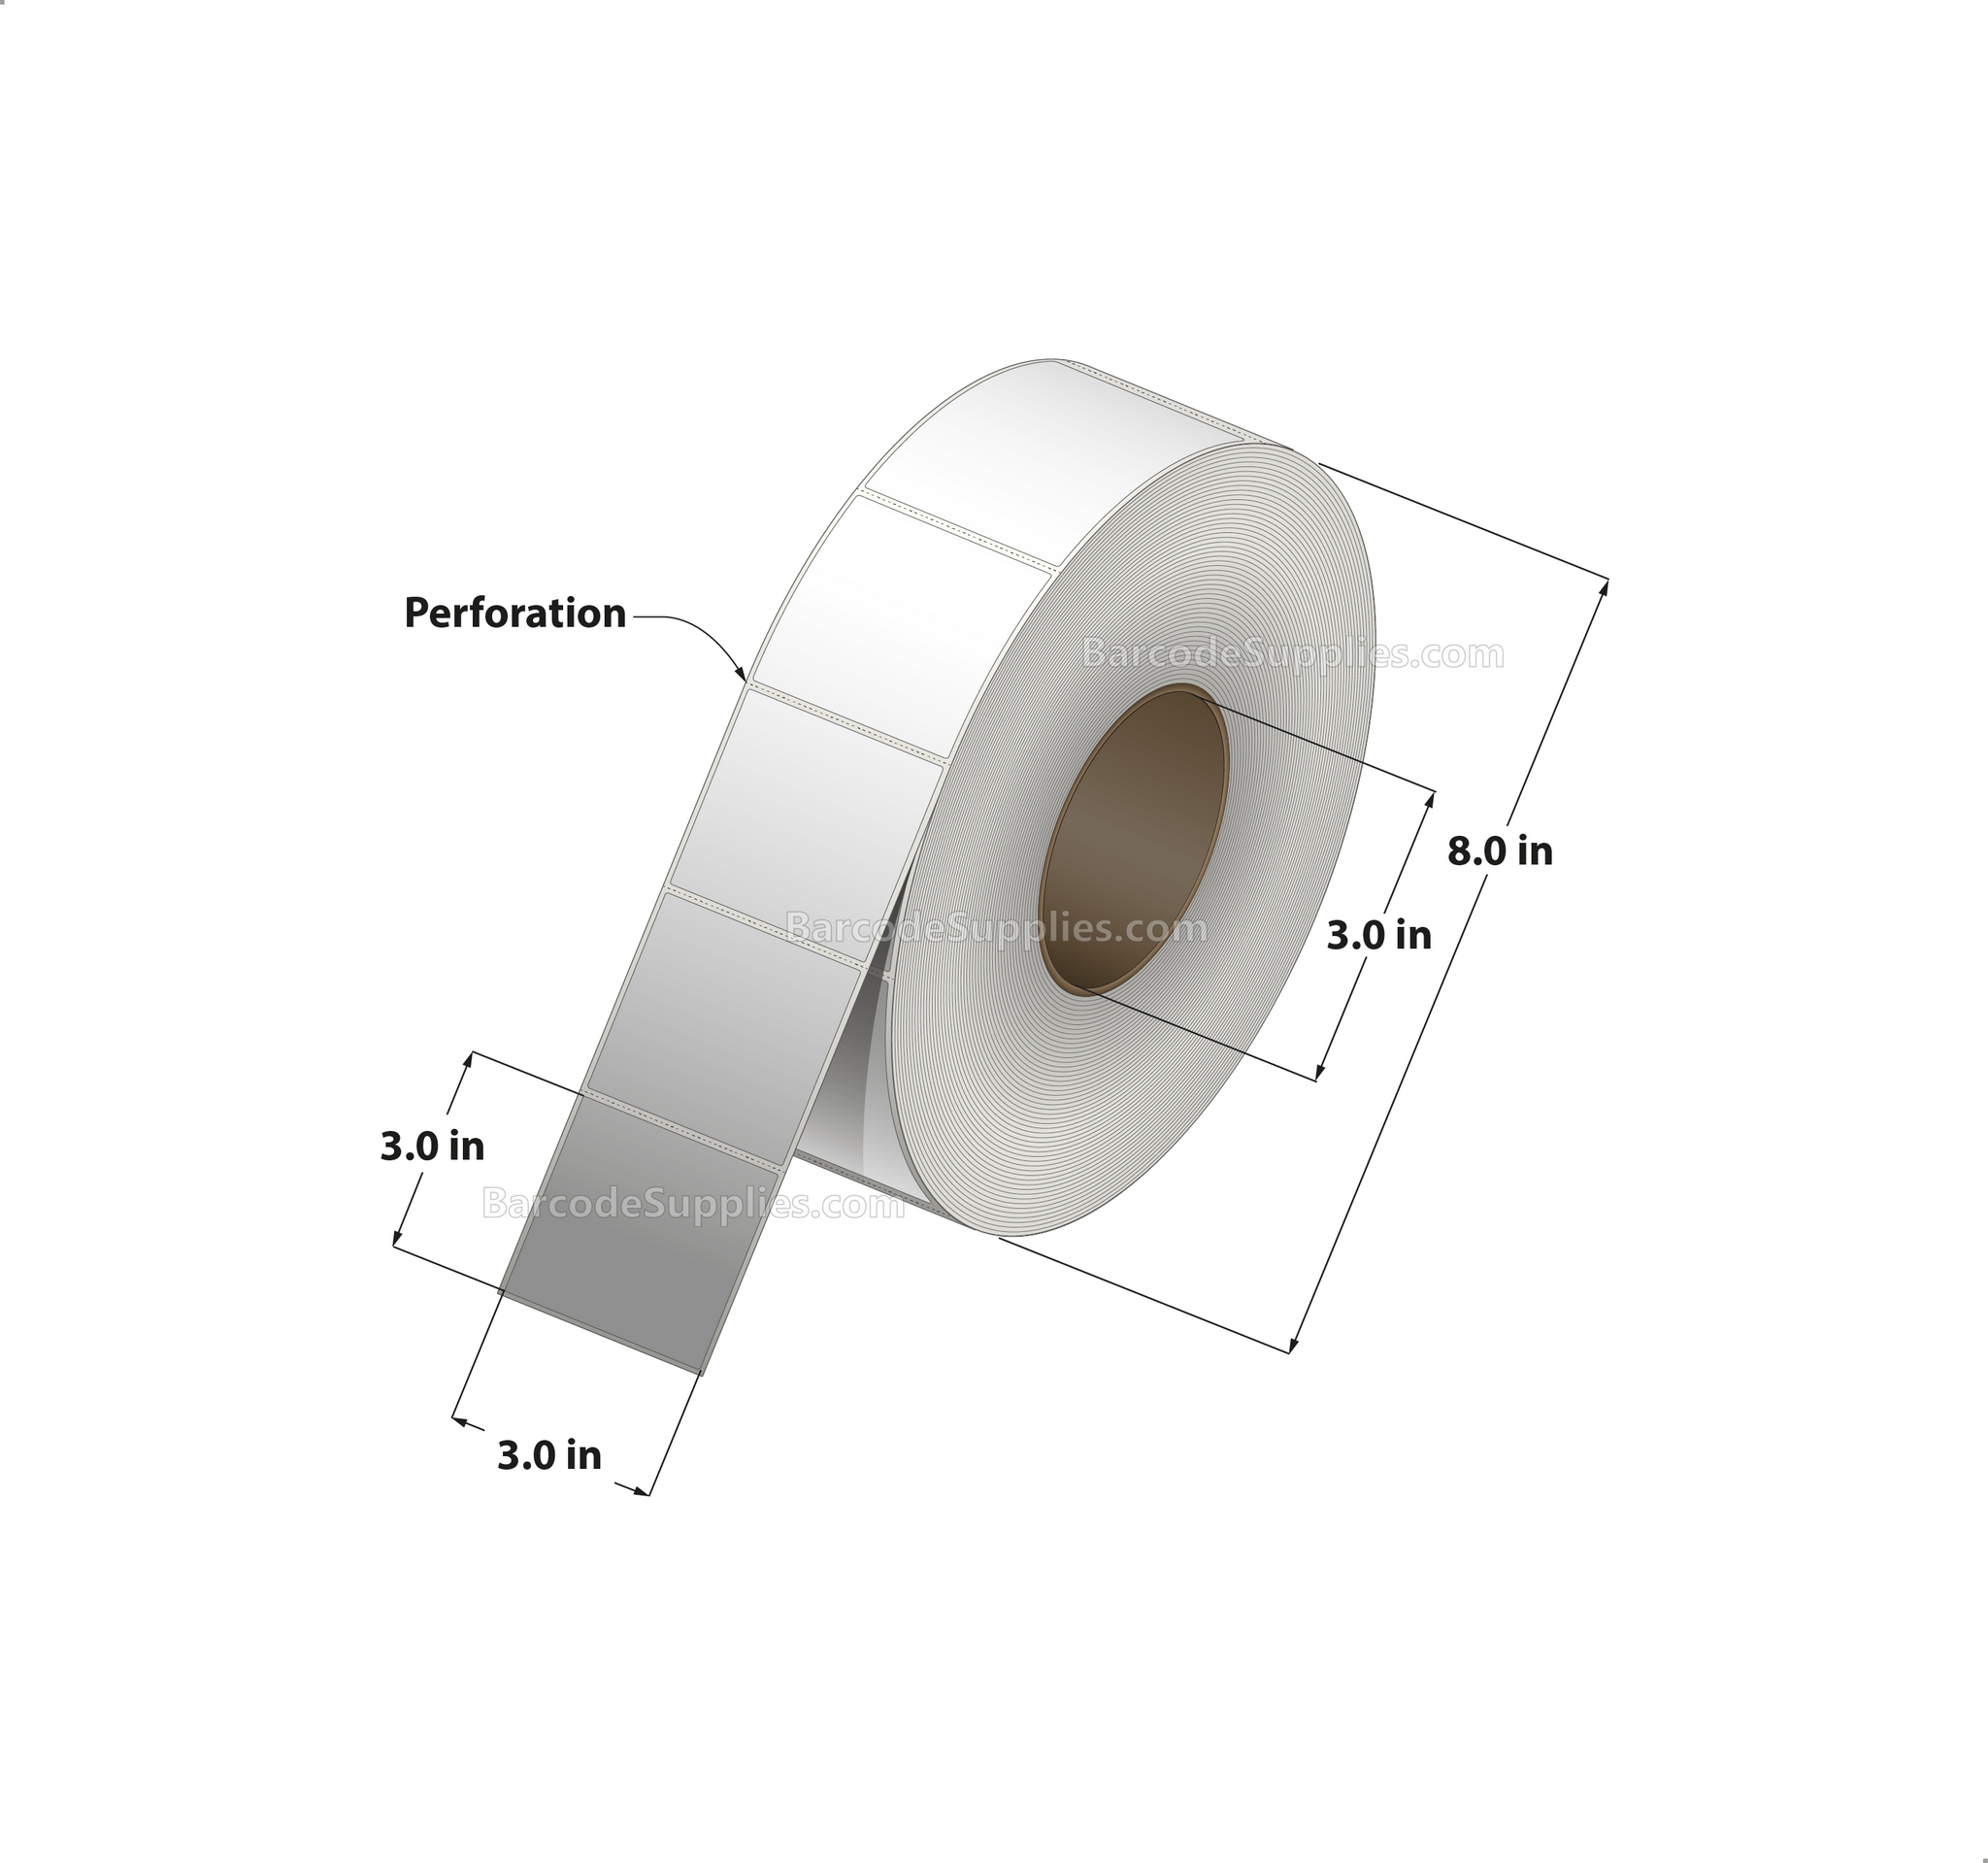 3 x 3 Thermal Transfer White Labels With Permanent Adhesive - Perforated - 2000 Labels Per Roll - Carton Of 8 Rolls - 16000 Labels Total - MPN: RT-3-3-2000-3